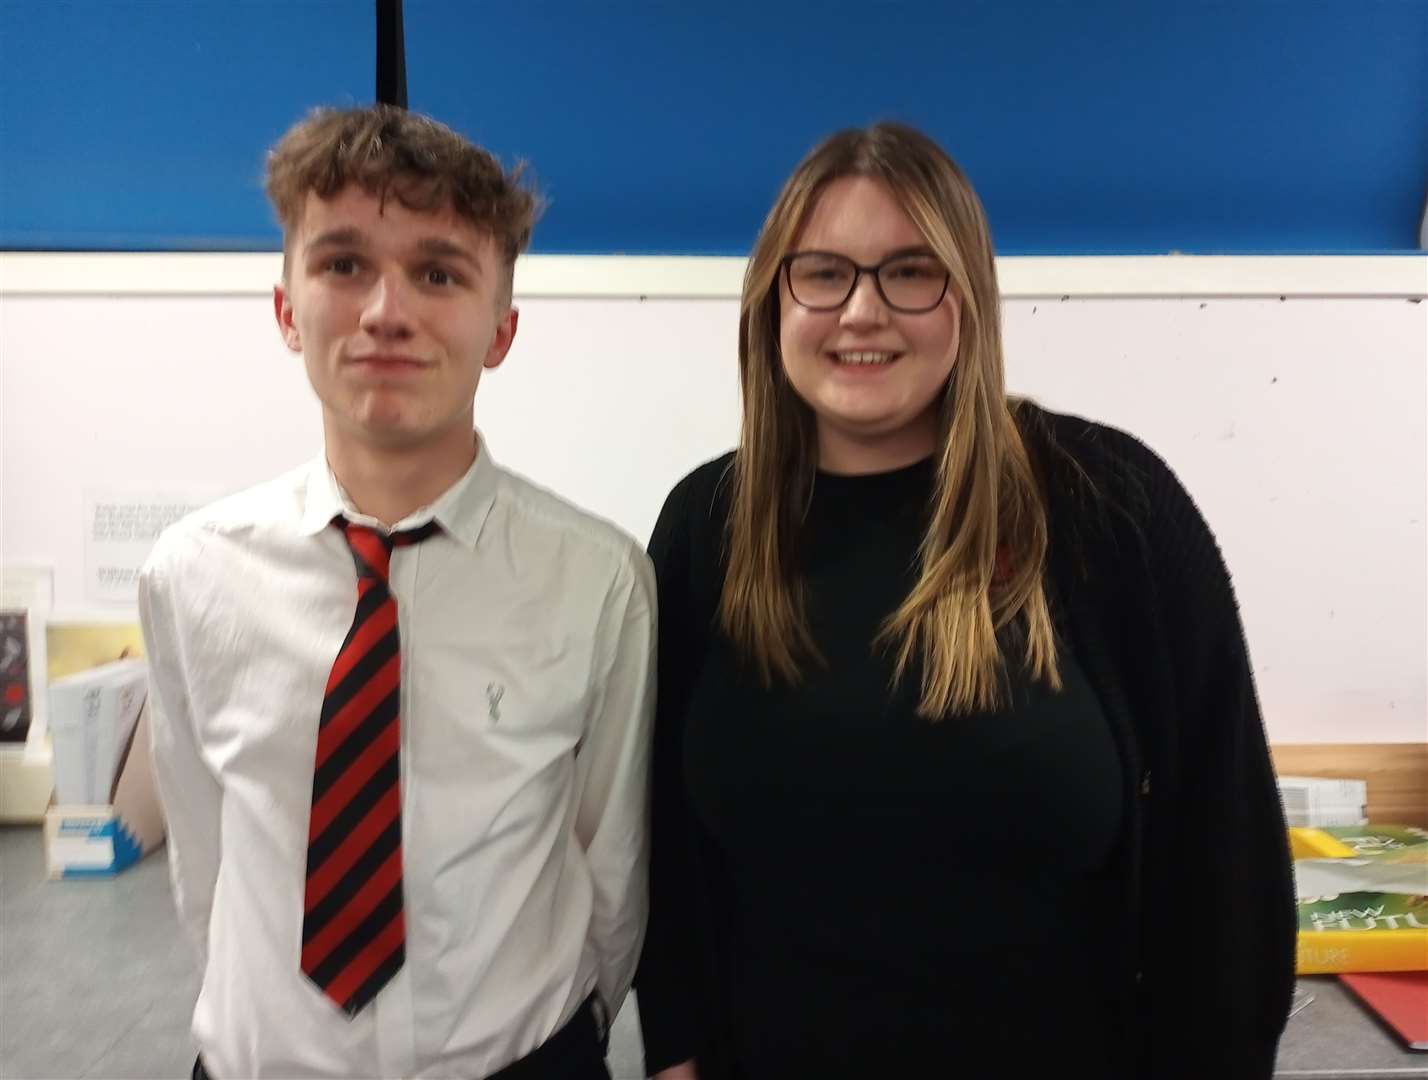 Innes Morgan and Ashleigh Coghill reached the semi-finals of the Donald Dewar Memorial Debating Tournament.